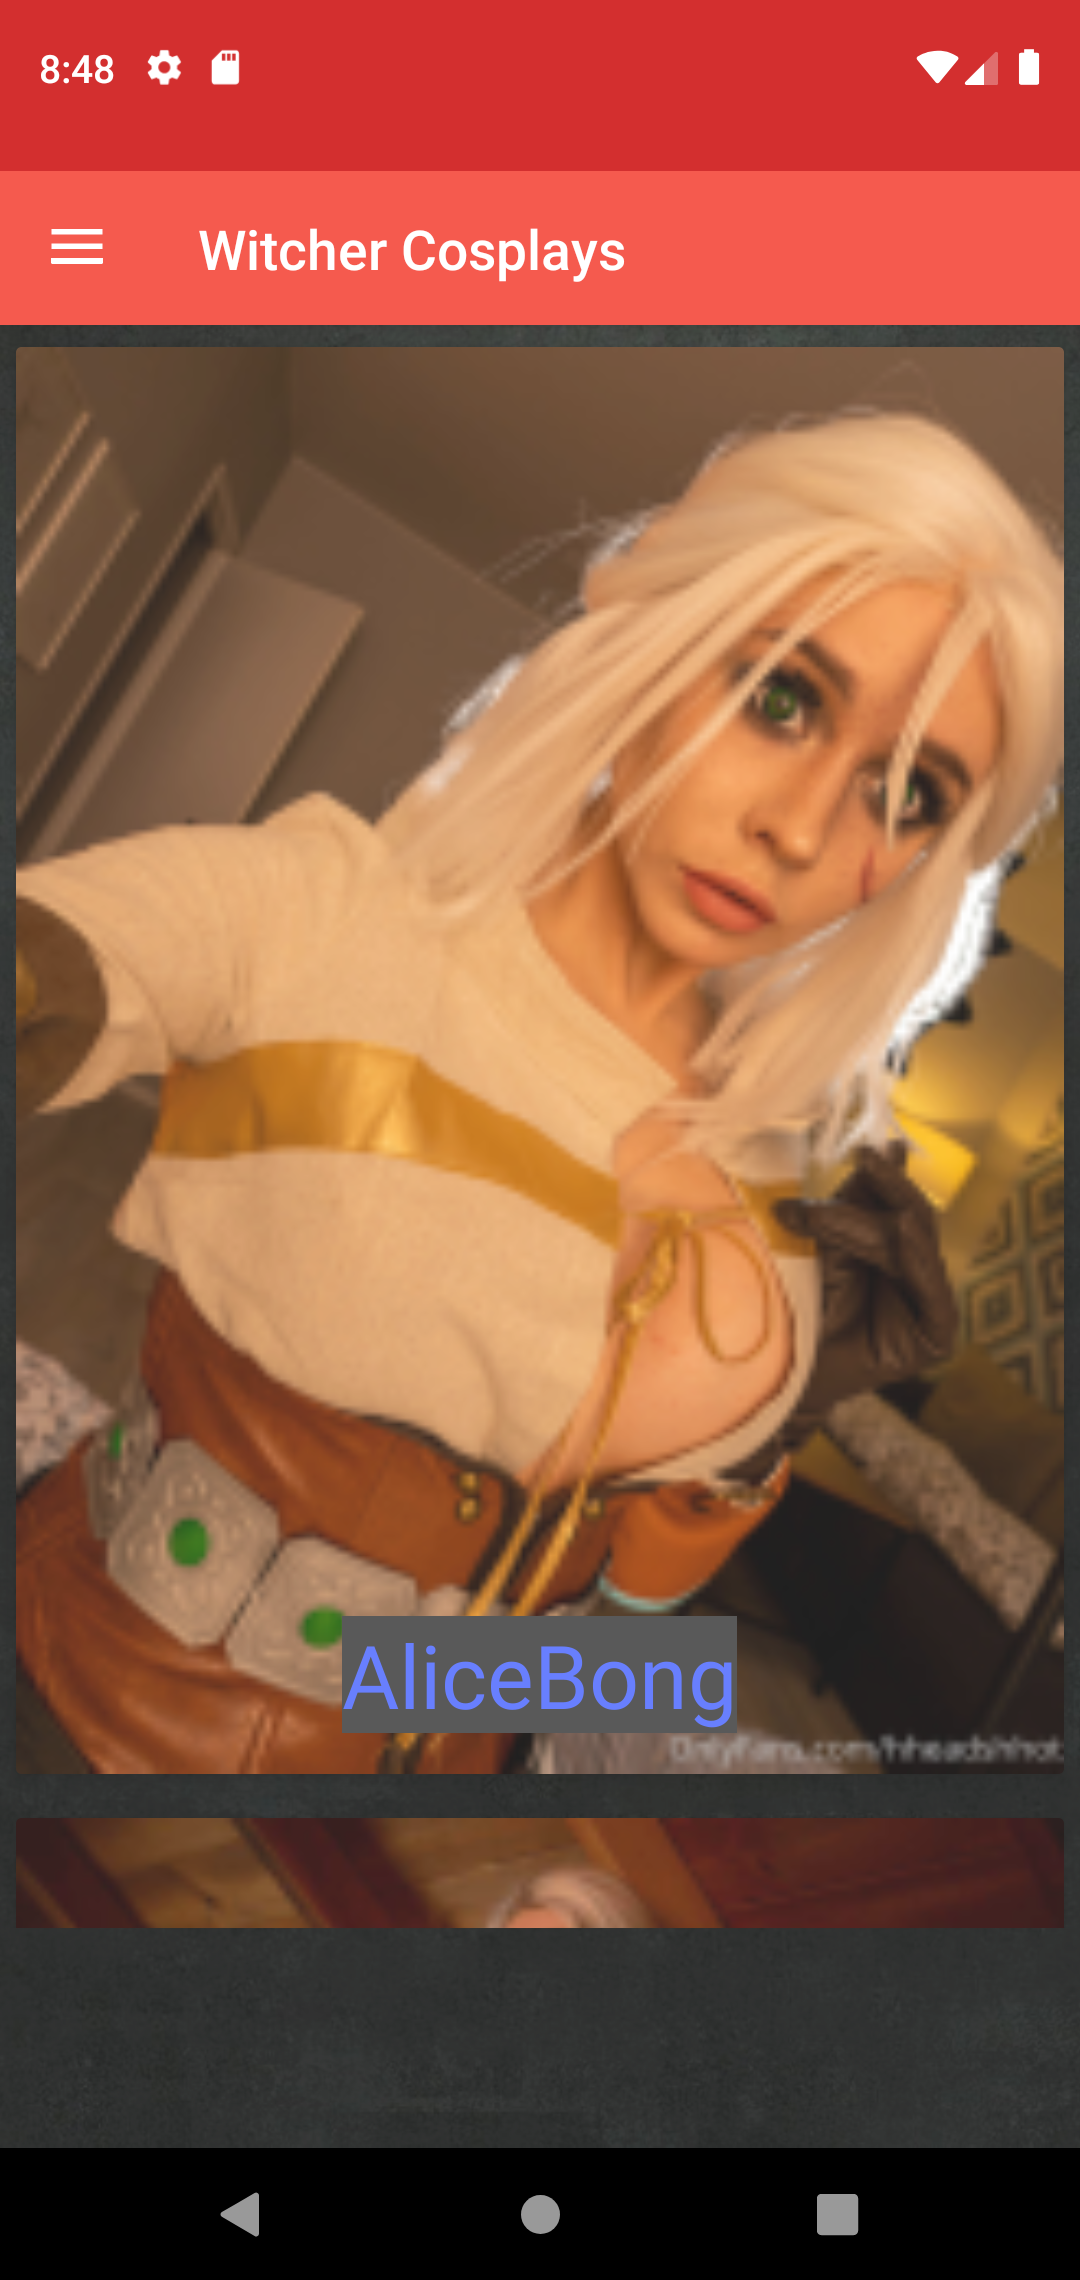 Witcher Cosplays free,sexy,android,chicks,picturd,aplikasi,cosplay,mature,black,dicks,witcher,gallery,live,apk,comics,erotic,pictures,with,anime,hot,app,hentai,wallpapers,porn,wallpaper,adult